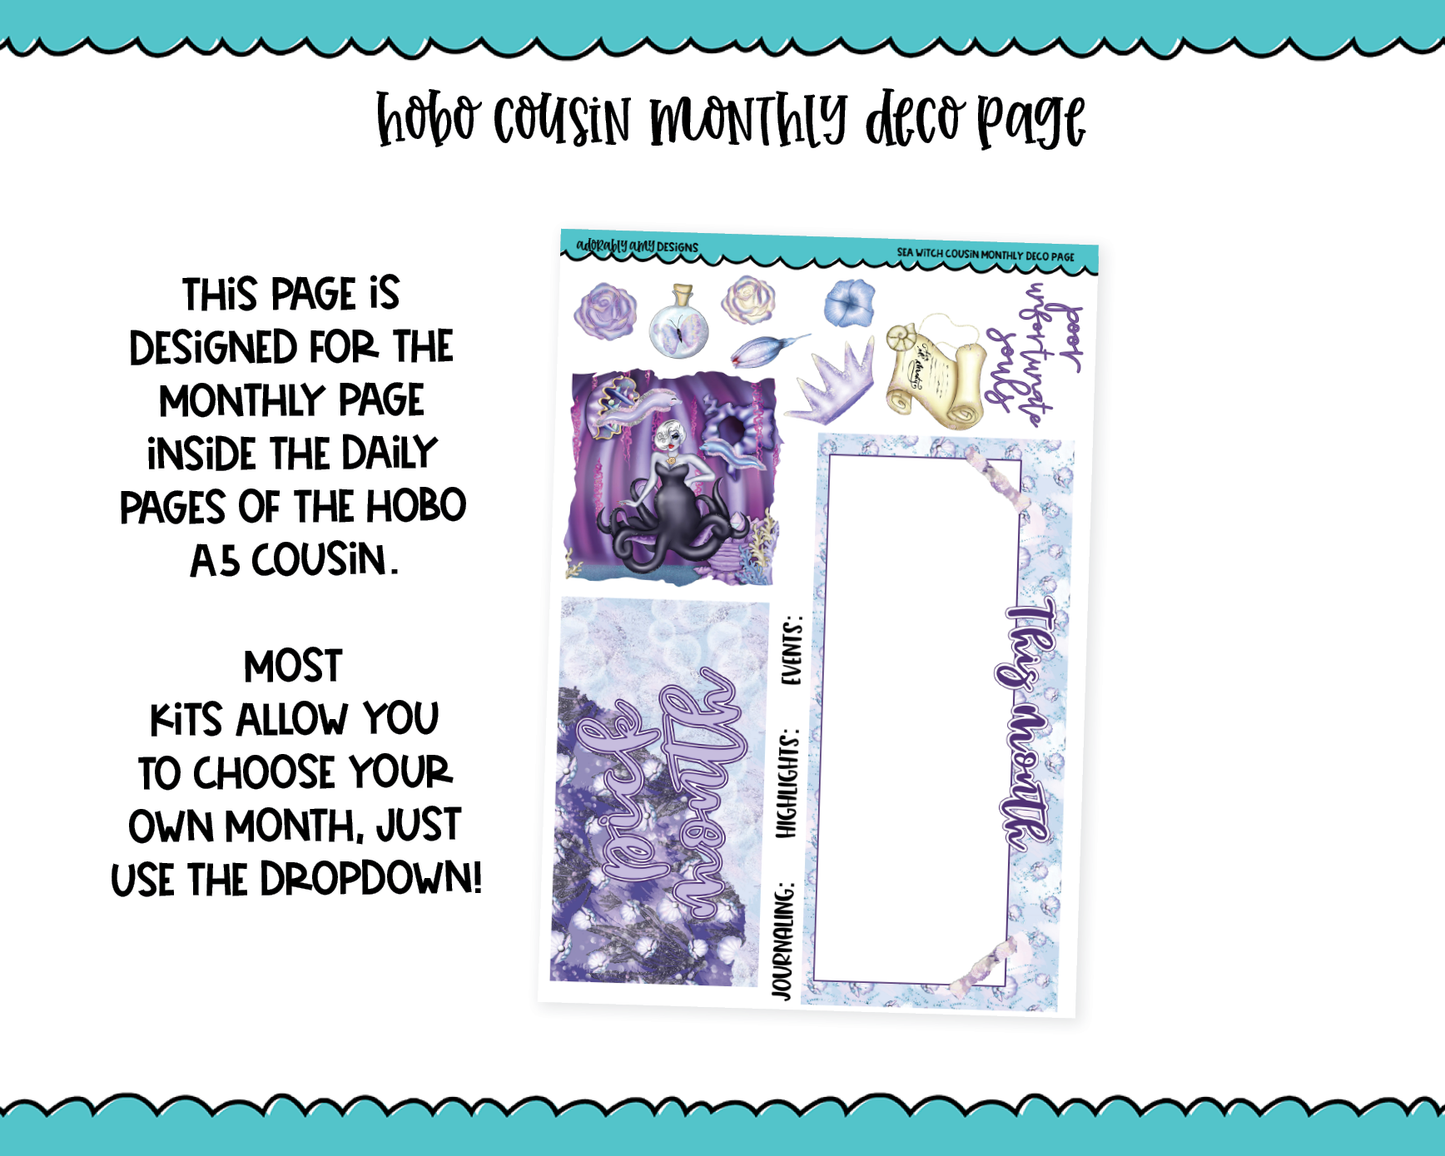 Hobonichi Cousin Monthly Pick Your Month Sea Witch Ursula Little Mermaid Themed Planner Sticker Kit for Hobo Cousin or Similar Planners